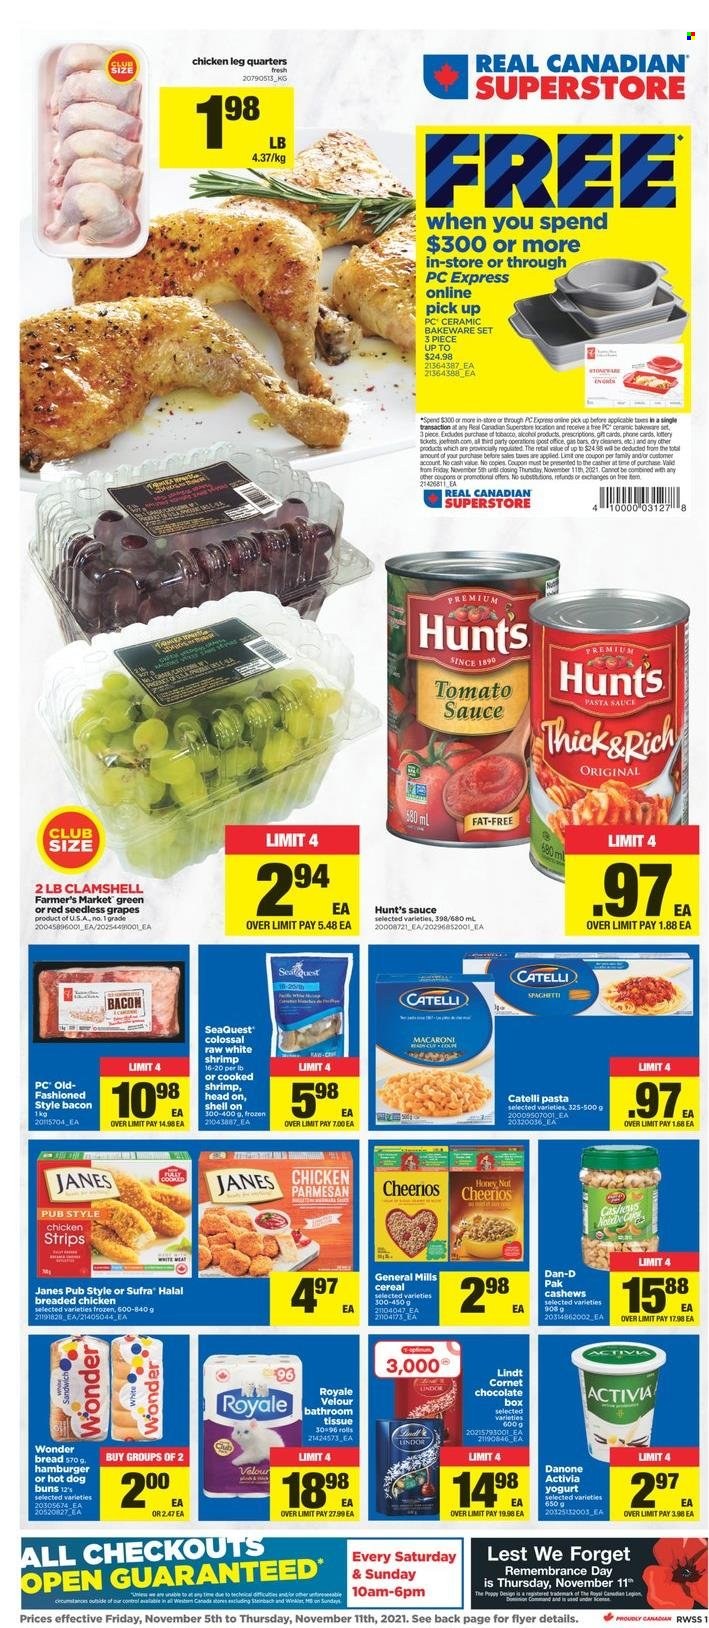 thumbnail - Real Canadian Superstore Flyer - November 05, 2021 - November 11, 2021 - Sales products - bread, buns, Ace, grapes, seedless grapes, shrimps, pasta sauce, macaroni, sauce, fried chicken, bacon, yoghurt, Activia, strips, chicken strips, chocolate, tomato sauce, cereals, Cheerios, Dan-D Pak, cashews, alcohol, chicken legs, tissues, bakeware, Danone, Lindt. Page 1.